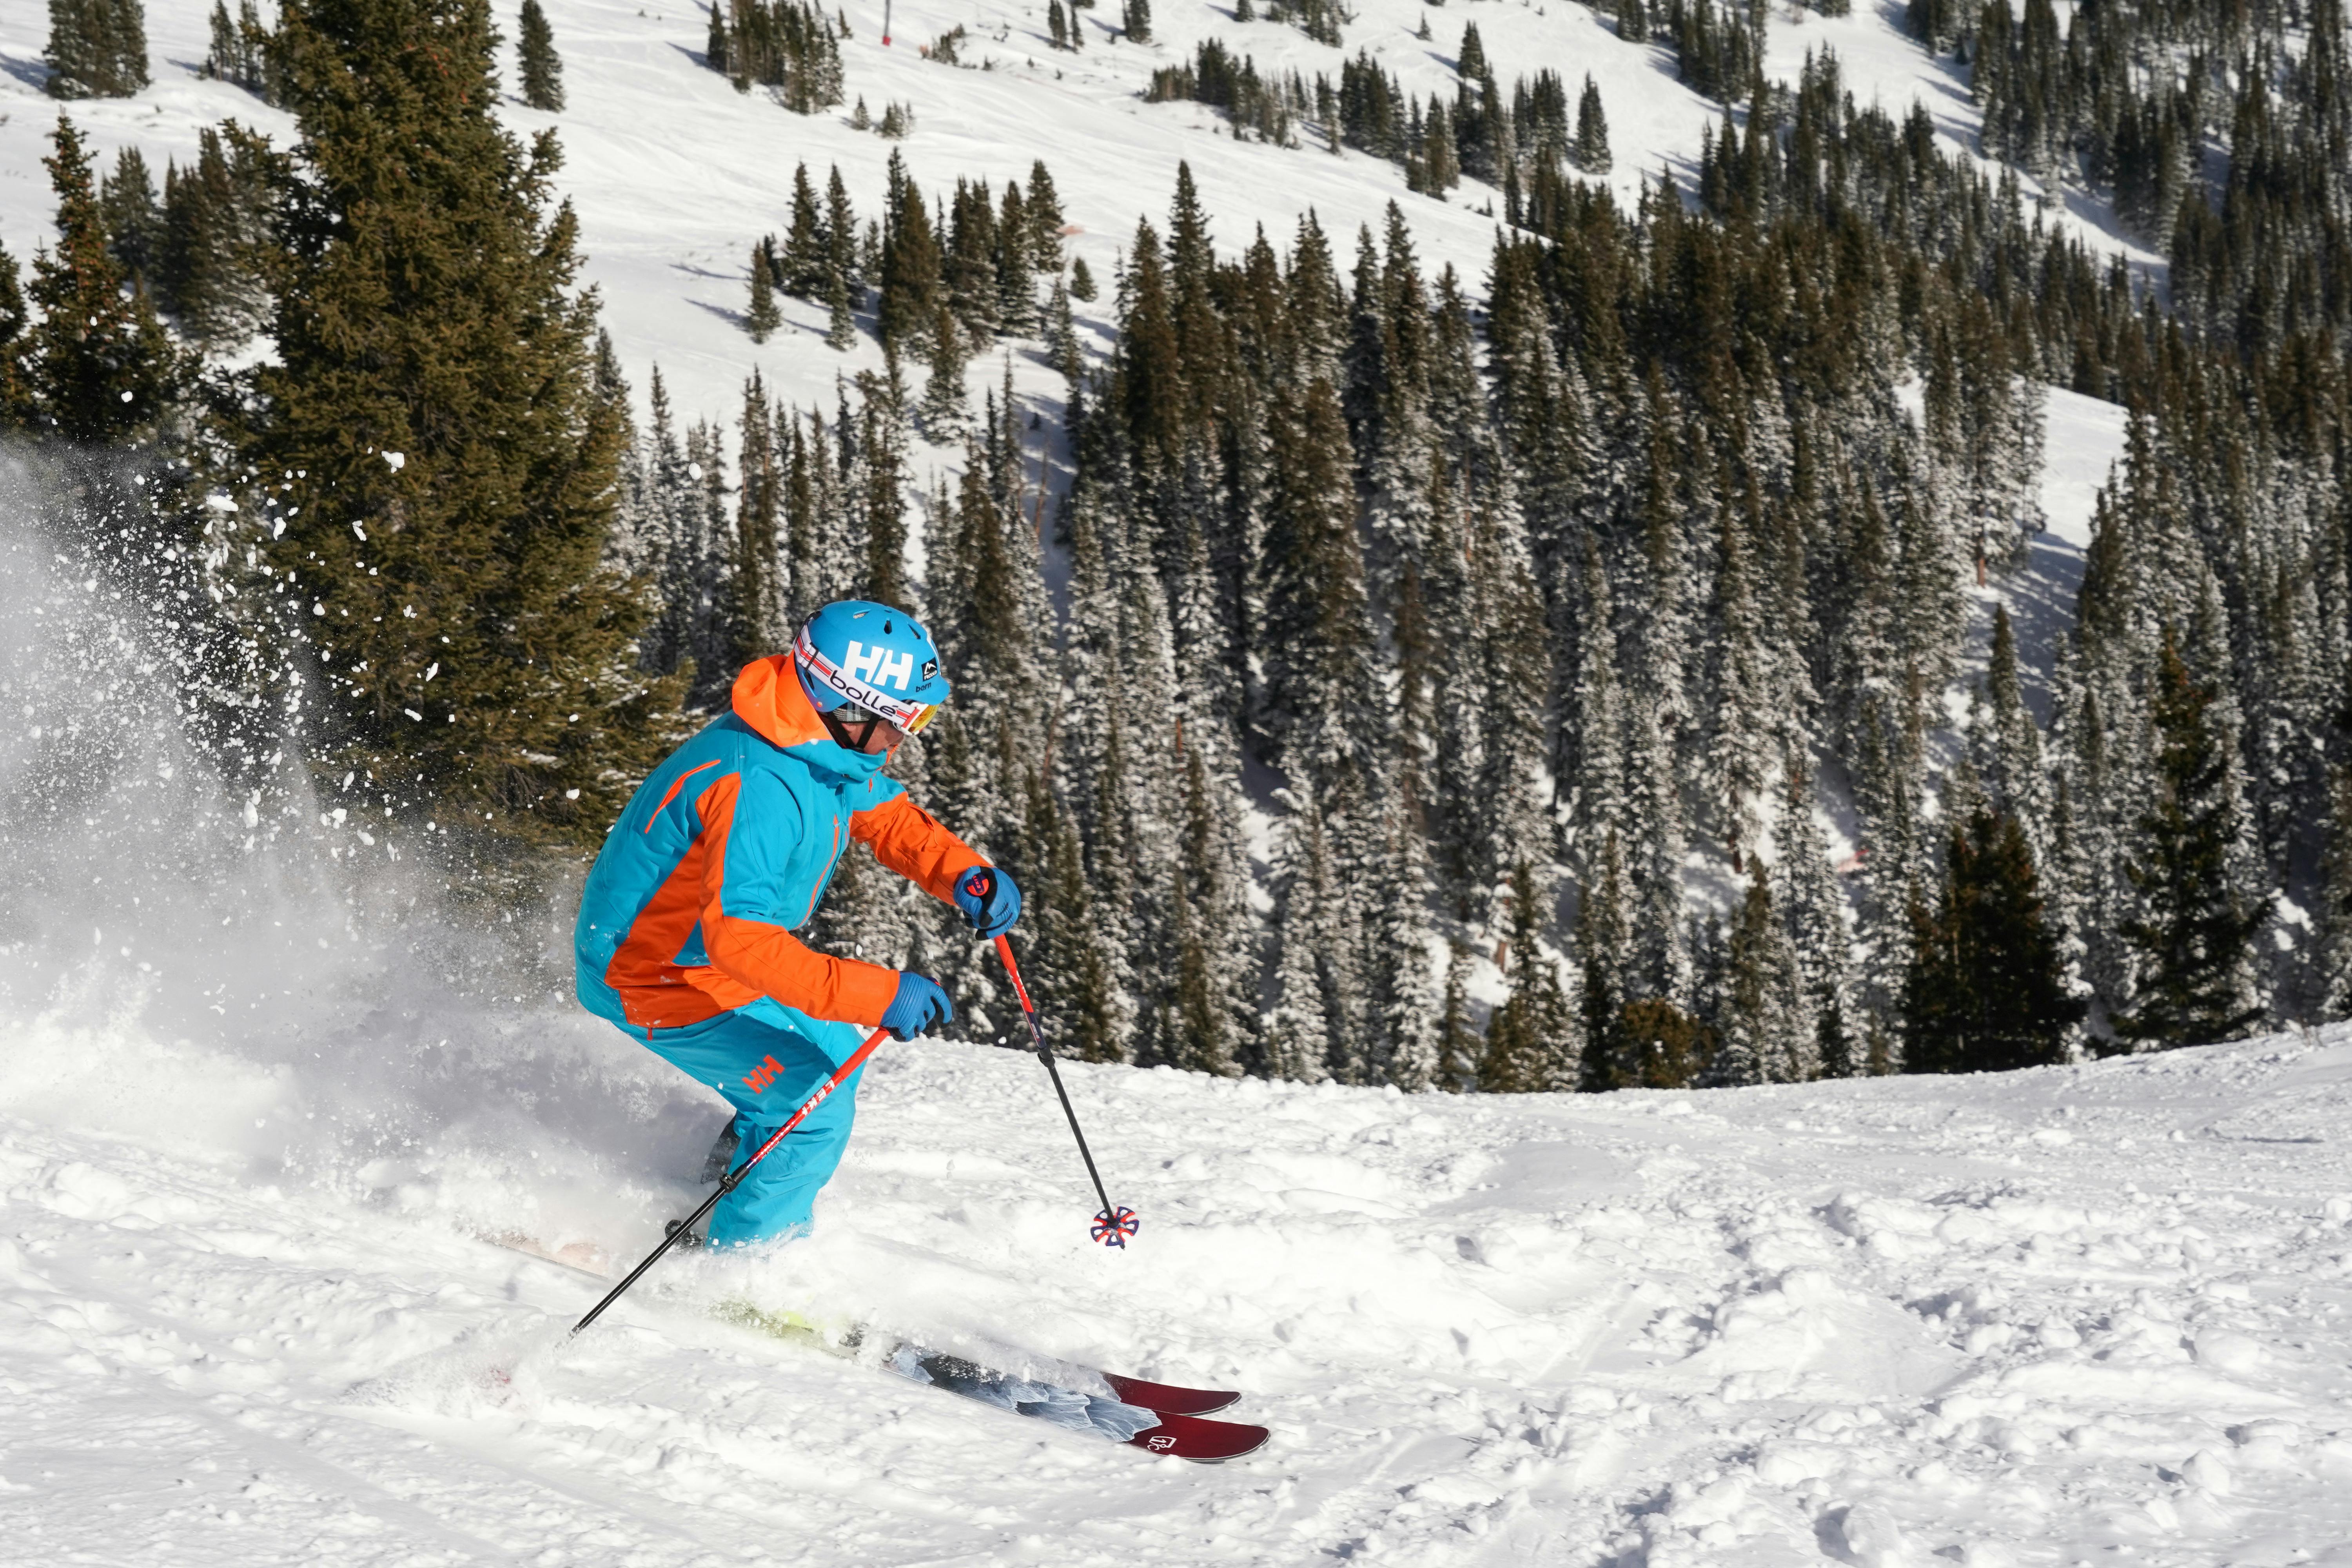 A man in a blue and orange ski jacket and pants ready to ski down a slope